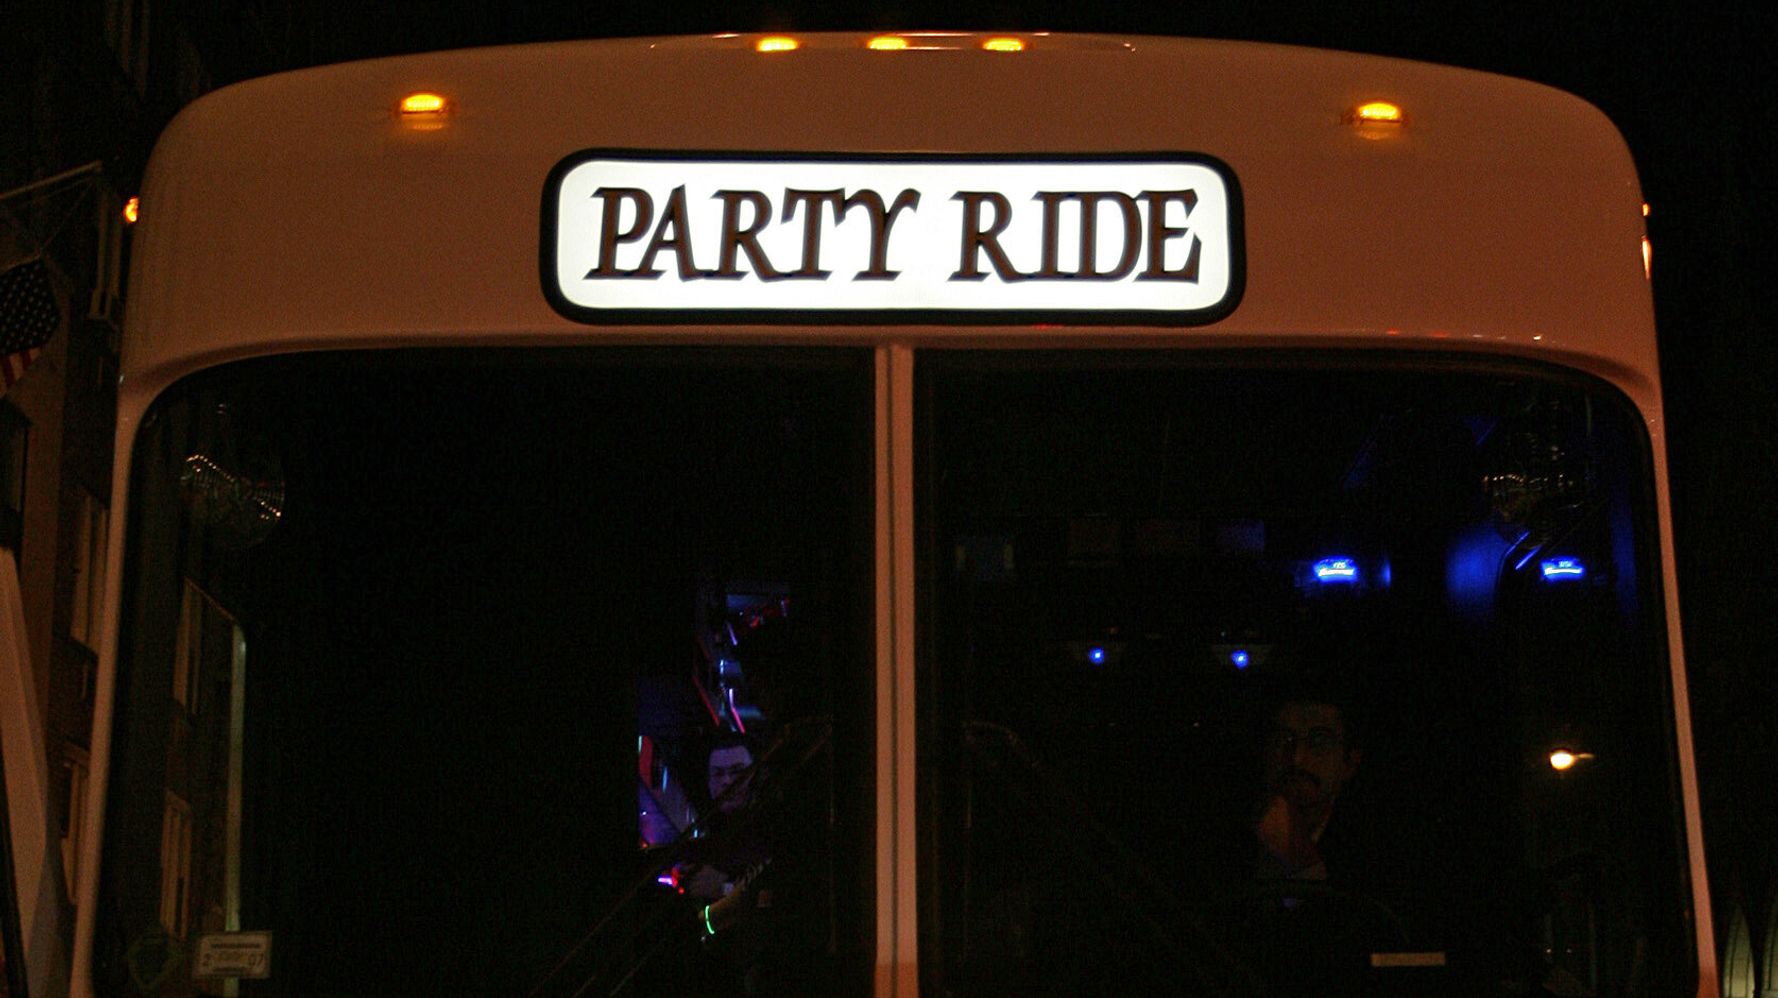 Boston High School Forced To Use Party Bus With Stripper Poles For Field Trip